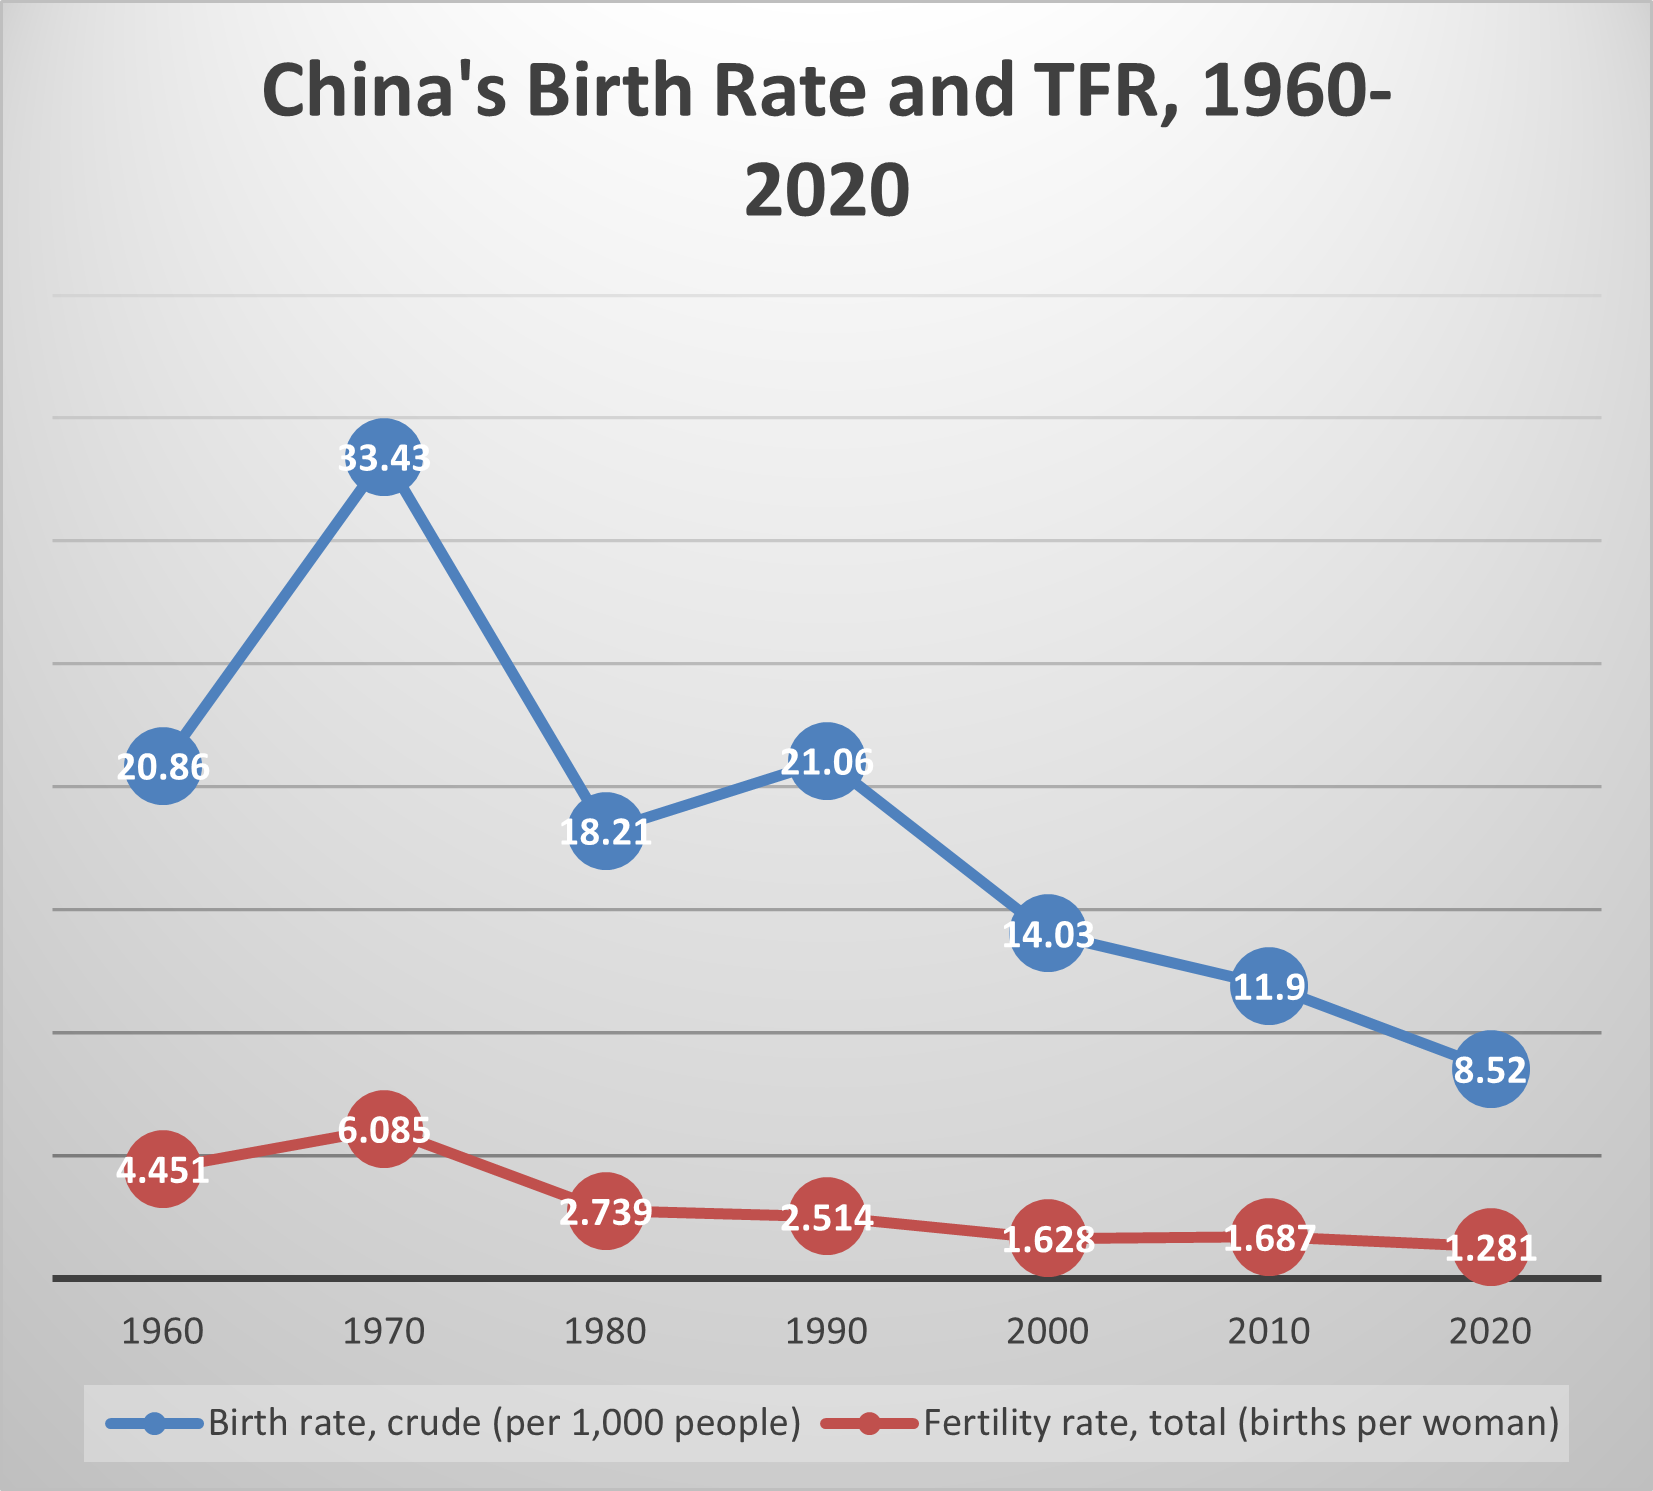 This graph tracks China's birth rate (BR) and total fertility rate (TFR) between 1960 and 2020. Both the BR and TFR rose between 1960 and 1970. The BR moved from 20.86 births per 1000 to 33.43 per 1000. The TFR increased from 4.45 children per woman to 6.085. During the 1970s, before the One Child Policy was implemented, the BR fell to 18.21 and the TFR fell to 2.74. Between 1980 and 1990, the first decade of the One Child Policy, TFR declined slightly while the BR actually rose due to population momentum. After 1990 both measures declined steadily. By 2020, the BR was 8.52 births per 1000 and the TFR was 1.28 children per woman.